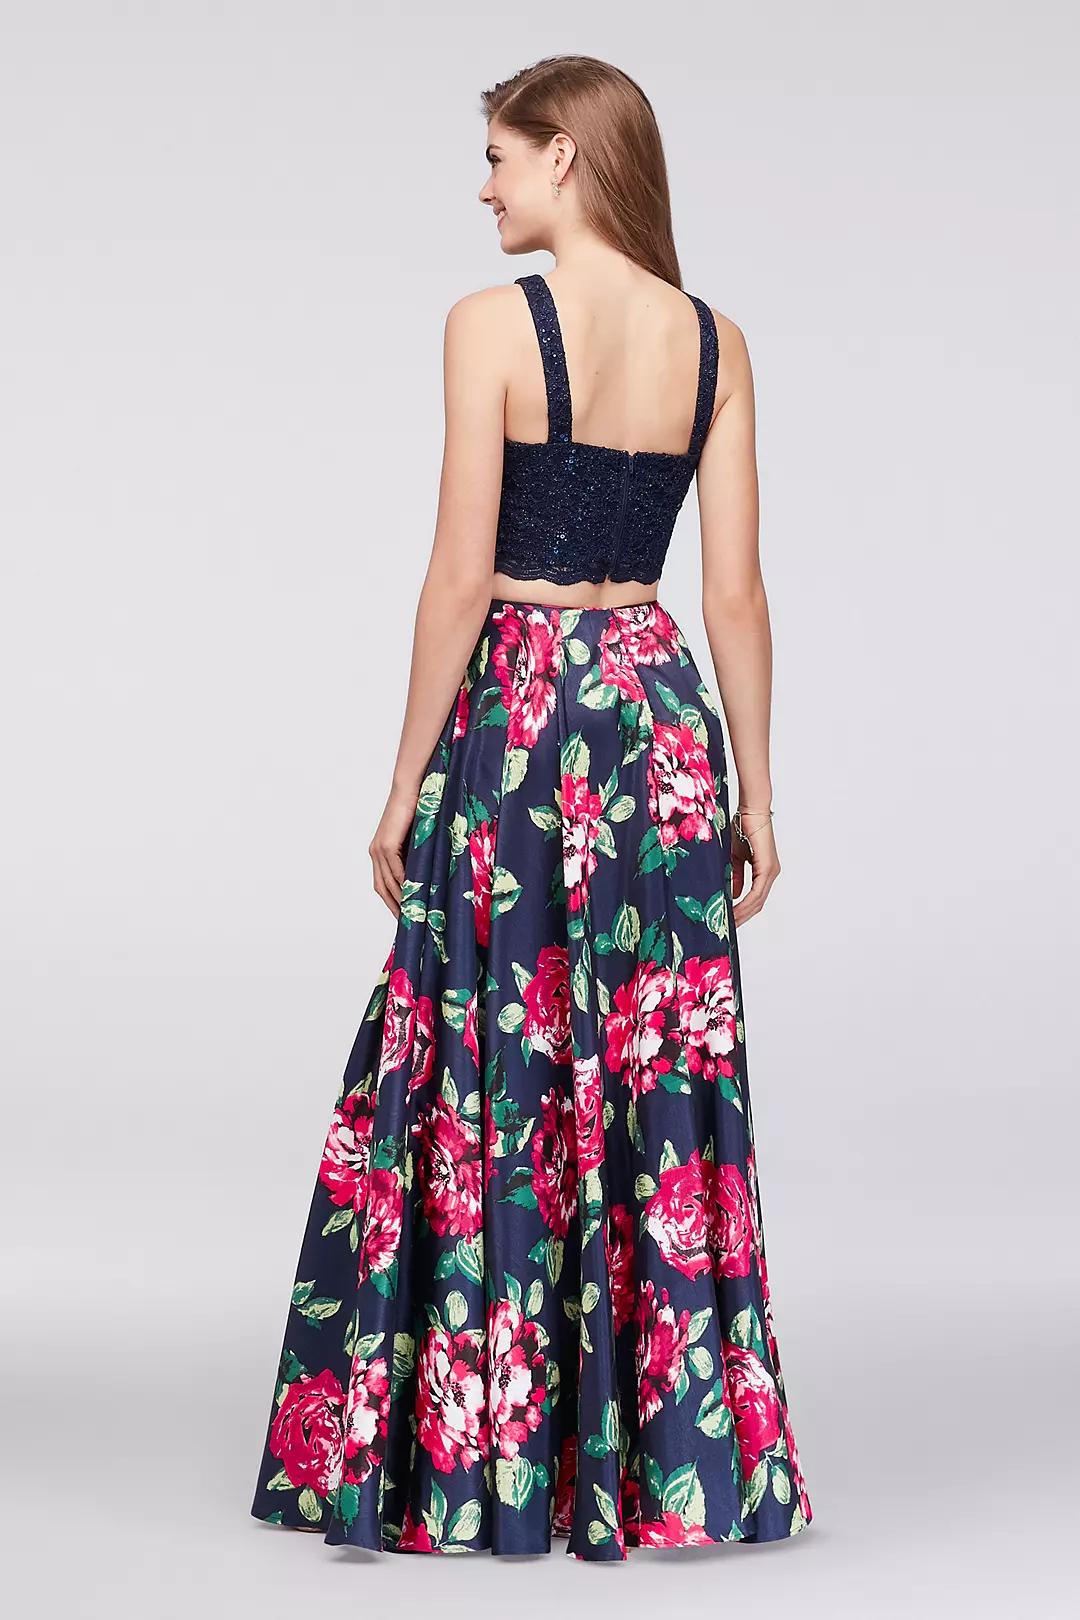 Sequin Lace Two-Piece Dress with Floral Skirt Image 2